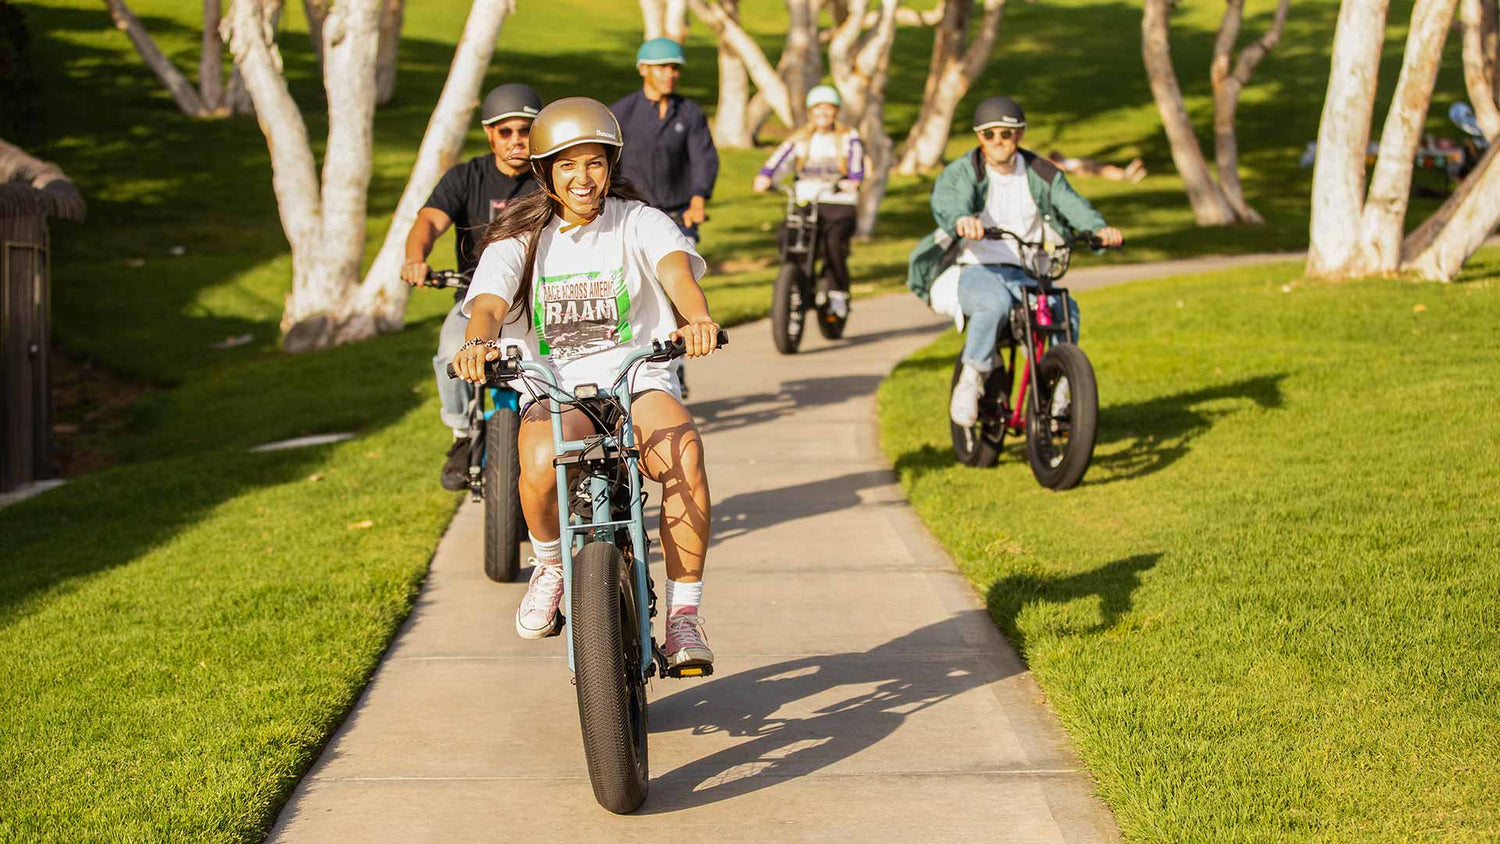 A group of friends riding ebikes down the sidewalk with helmets on.